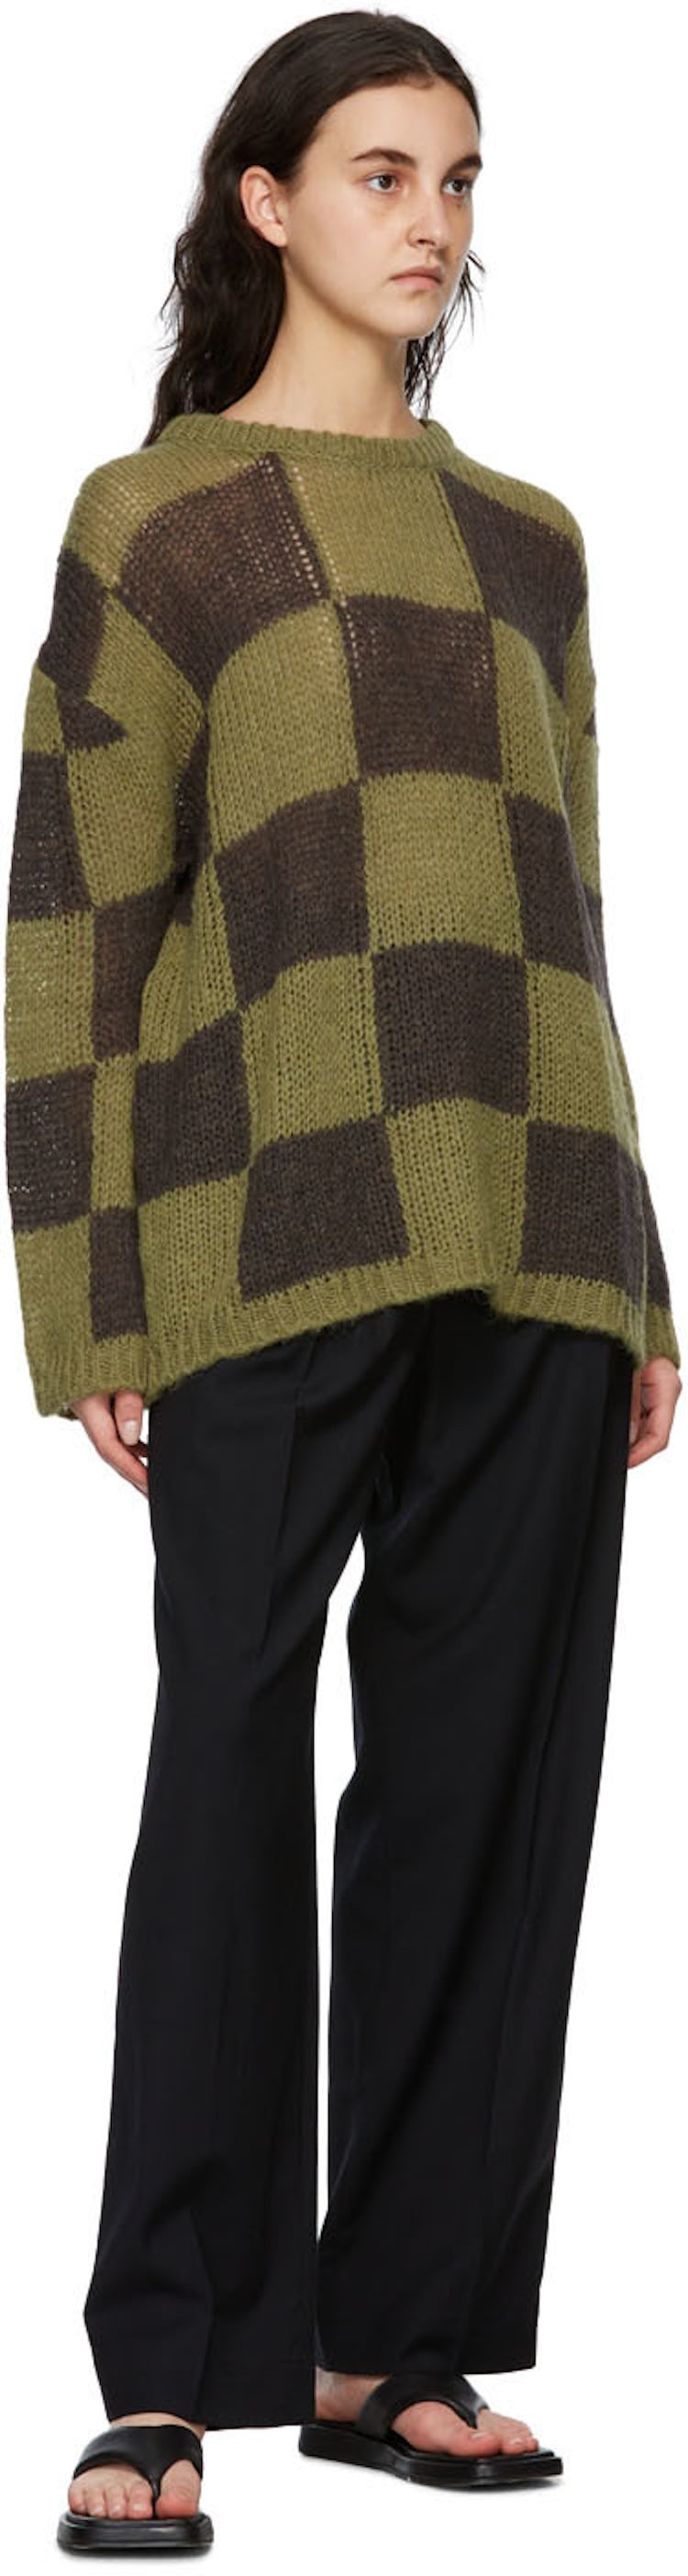 Green & Brown Wool Chessboard Check Sweater: additional image